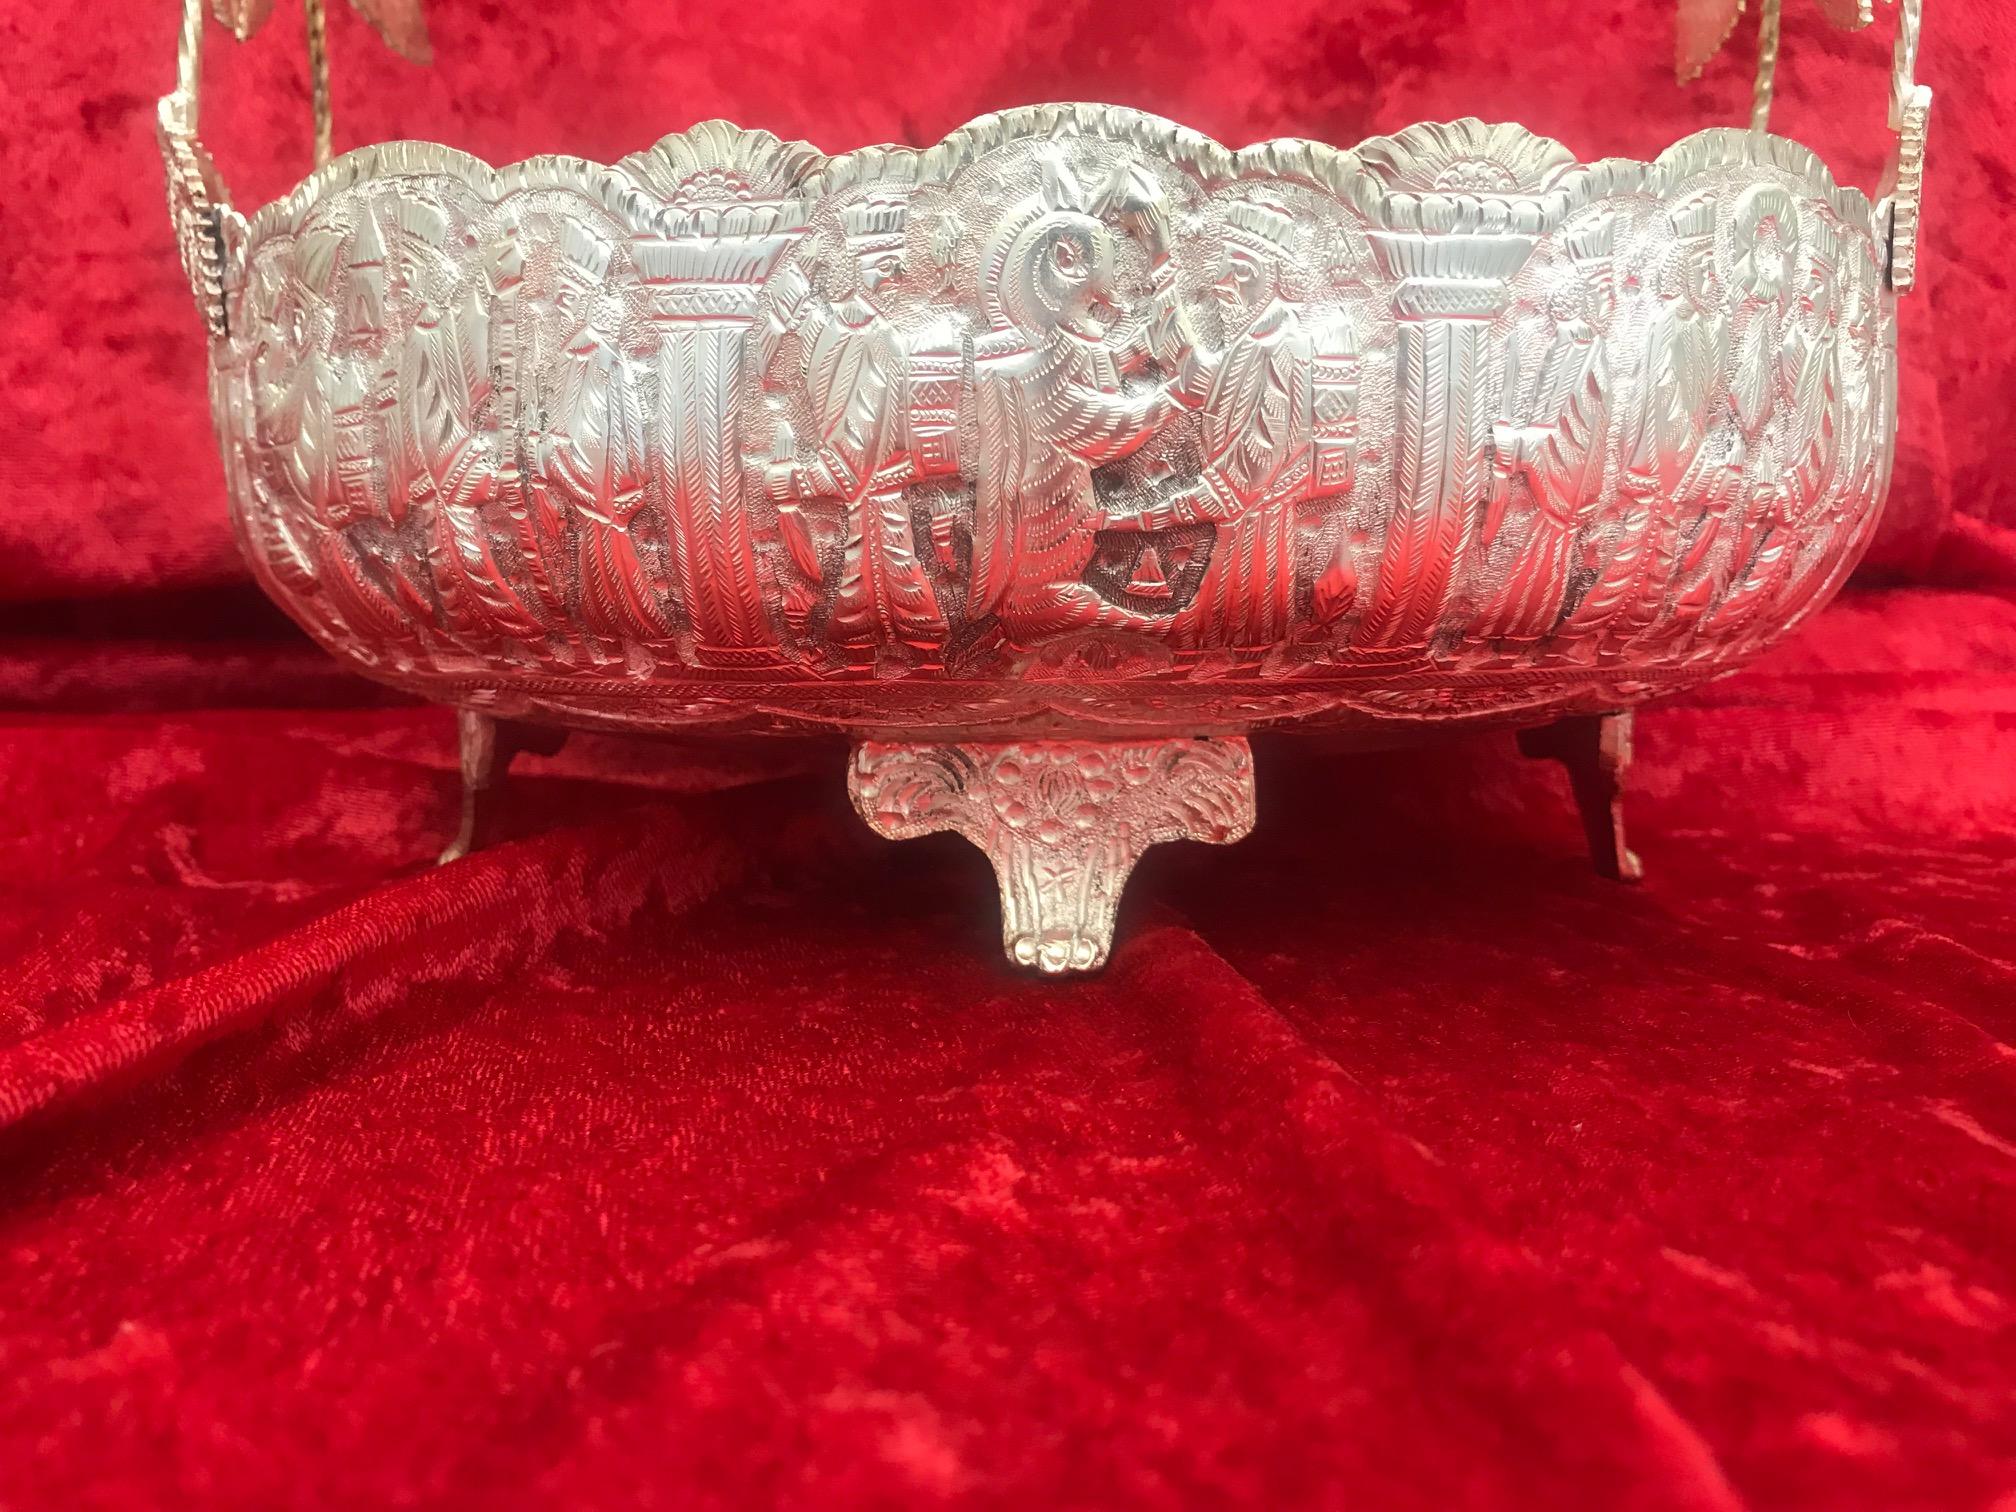 Arts and Crafts Handmade Silver Bowl Oval Shape with 4 Legs and Handle with Leaves For Sale